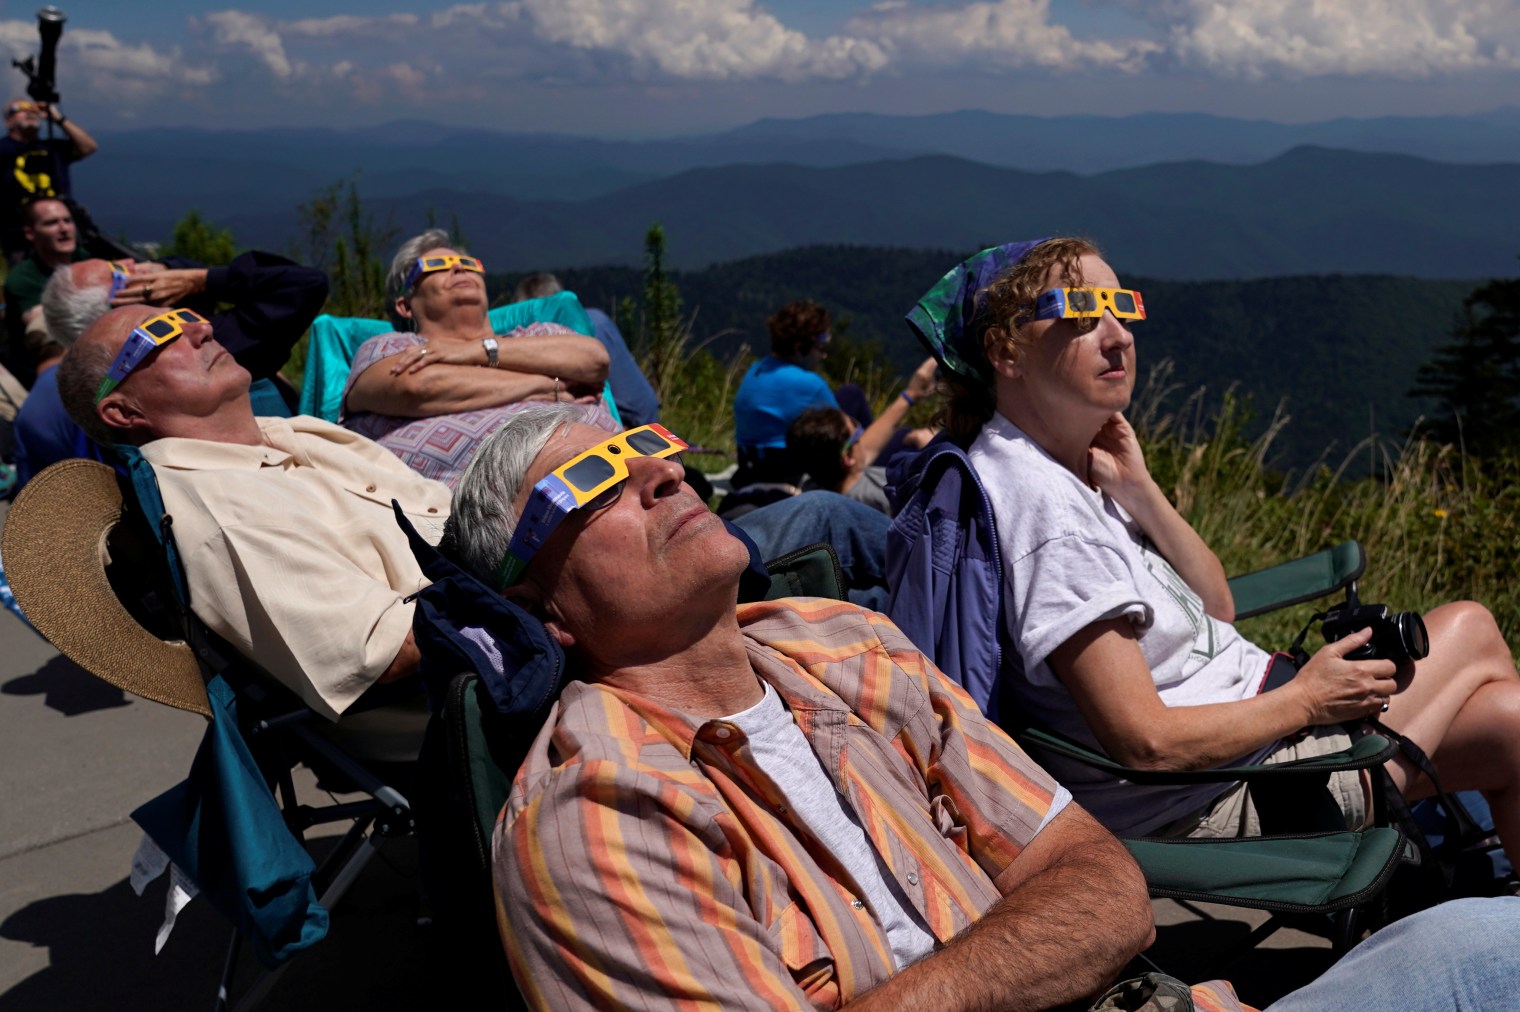 People watch as the solar eclipse approaches totality from Clingmans Dome, which at 6,643 feet (2,025m) is the highest point in the Great Smoky Mountains National Park, Tennessee on Aug. 21, 2017. 